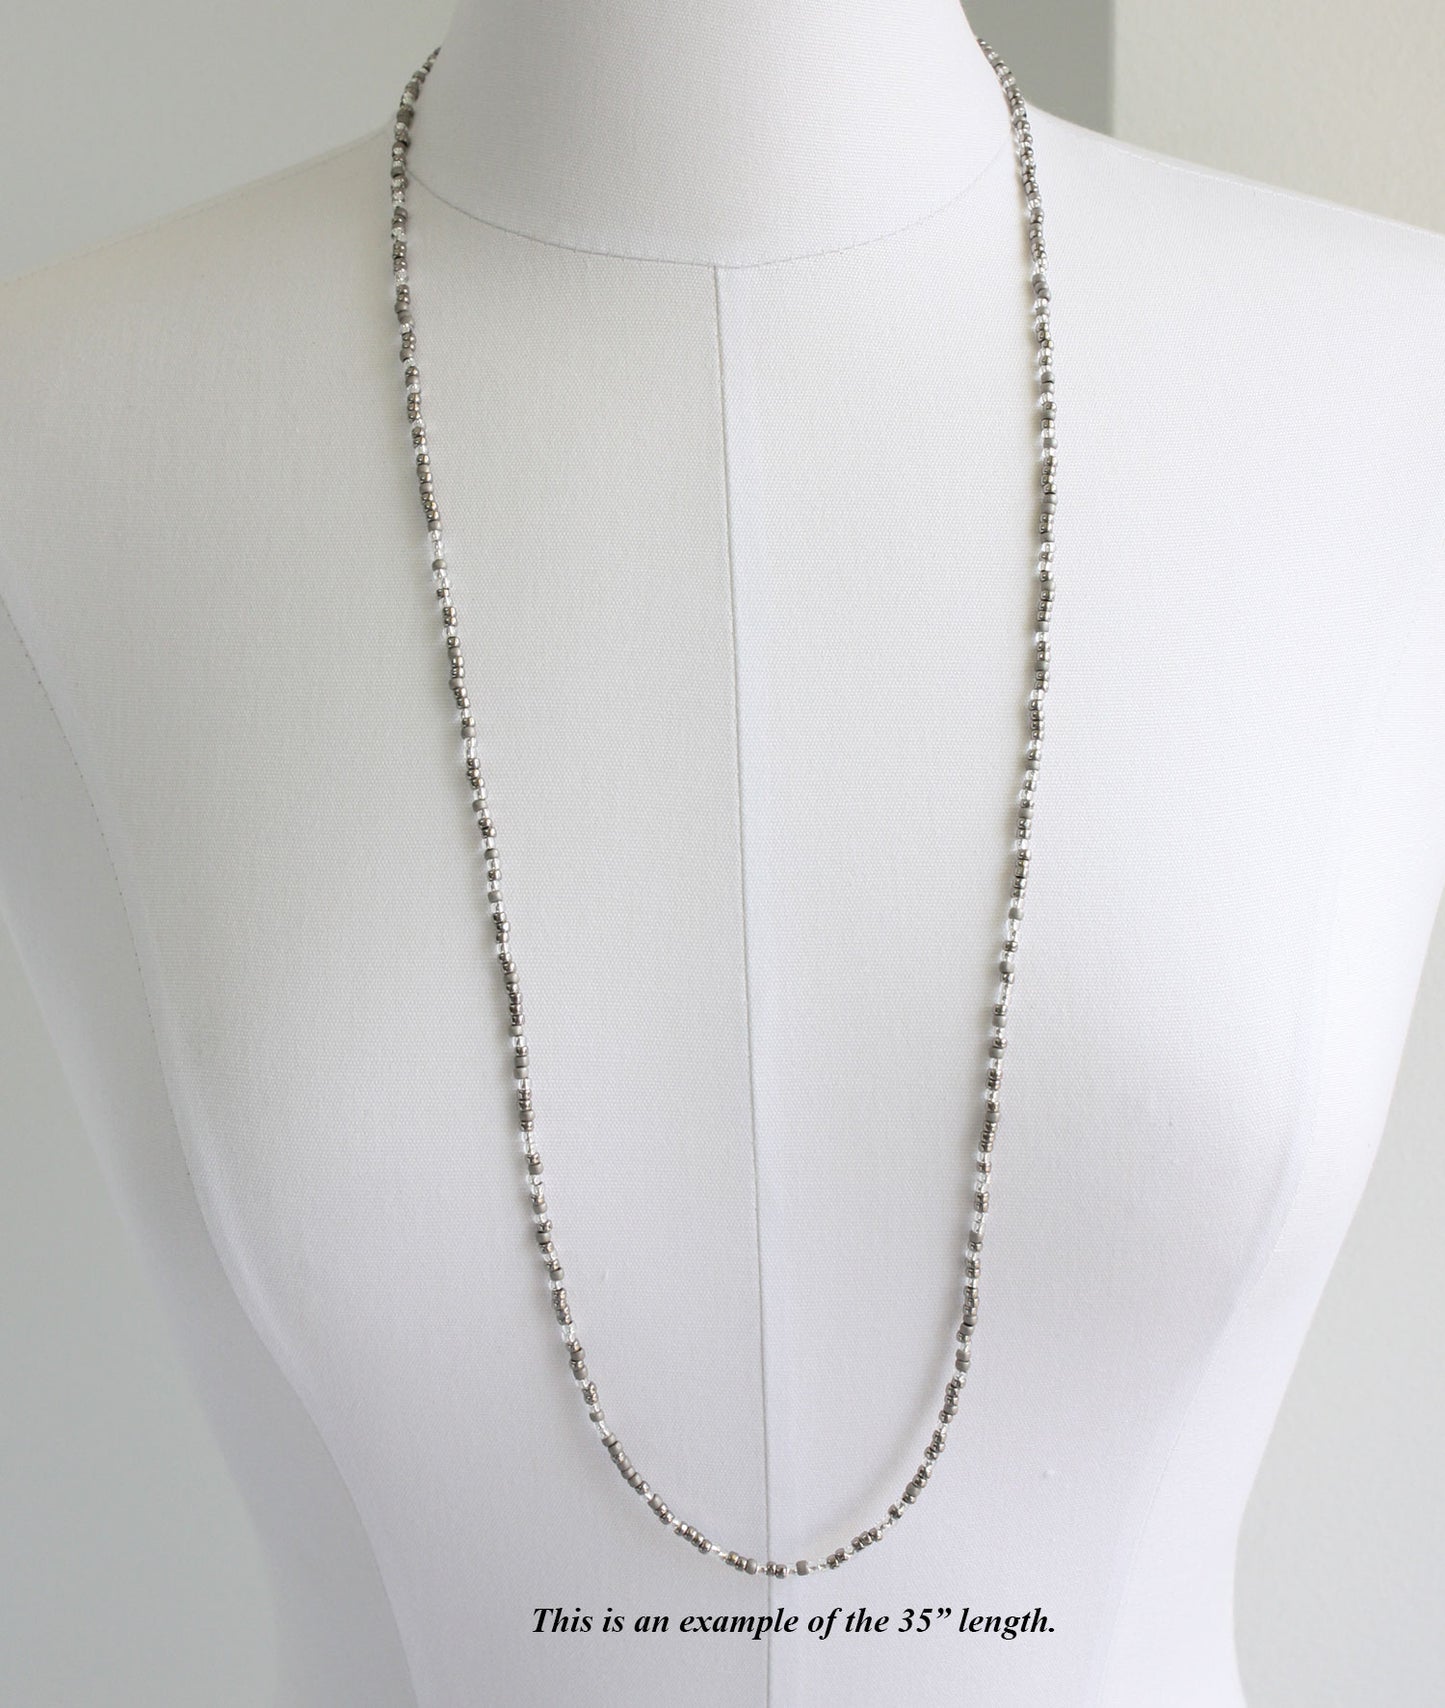 LOng Silver and Grey Seed Bead Necklace